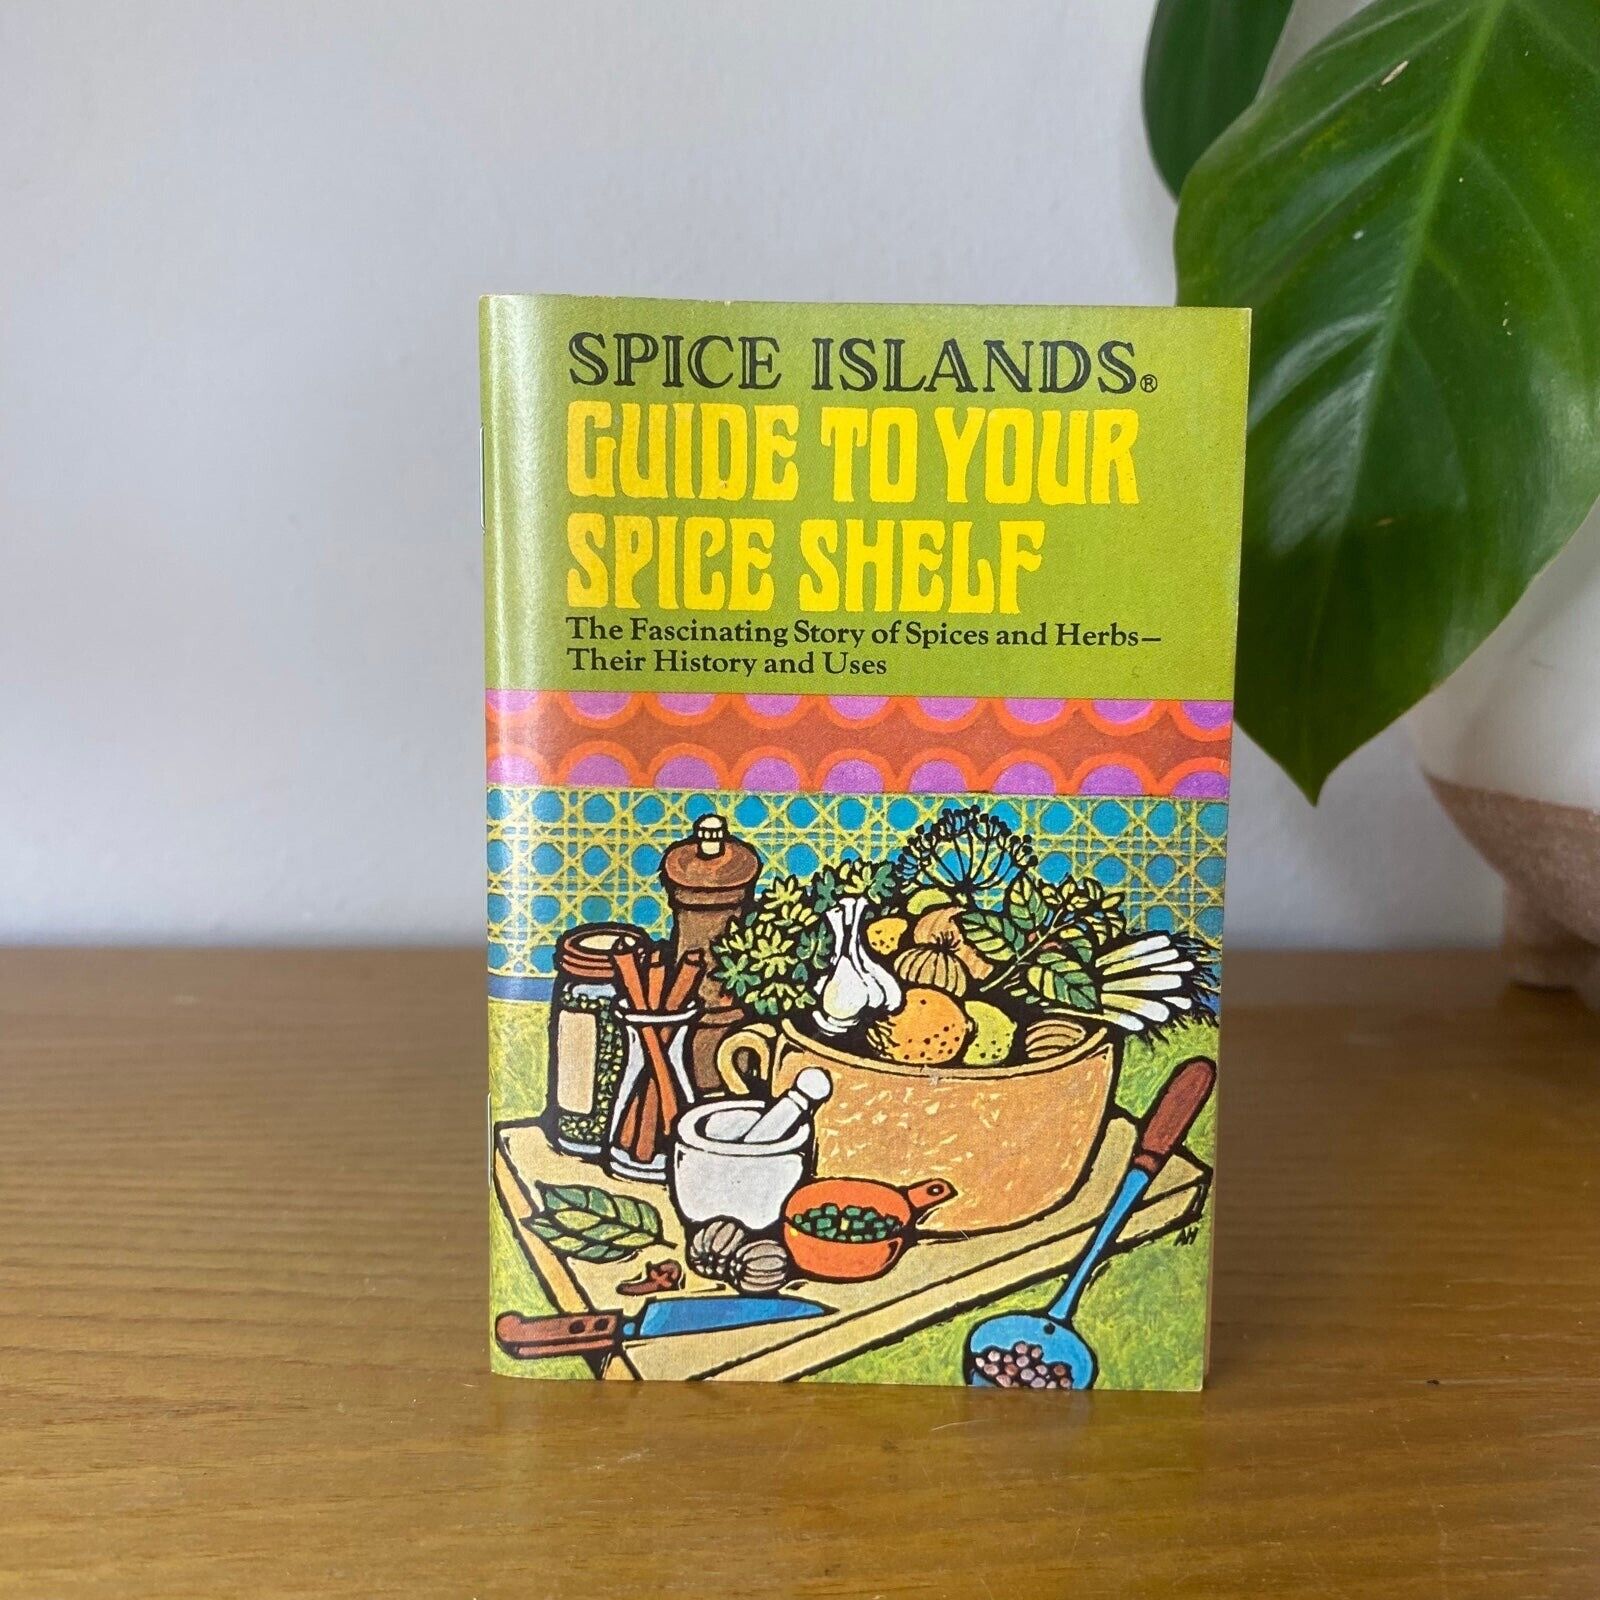 Spice Islands: Guide To Your Spice Shelf - 1975 Vintage Mini Book Booklet